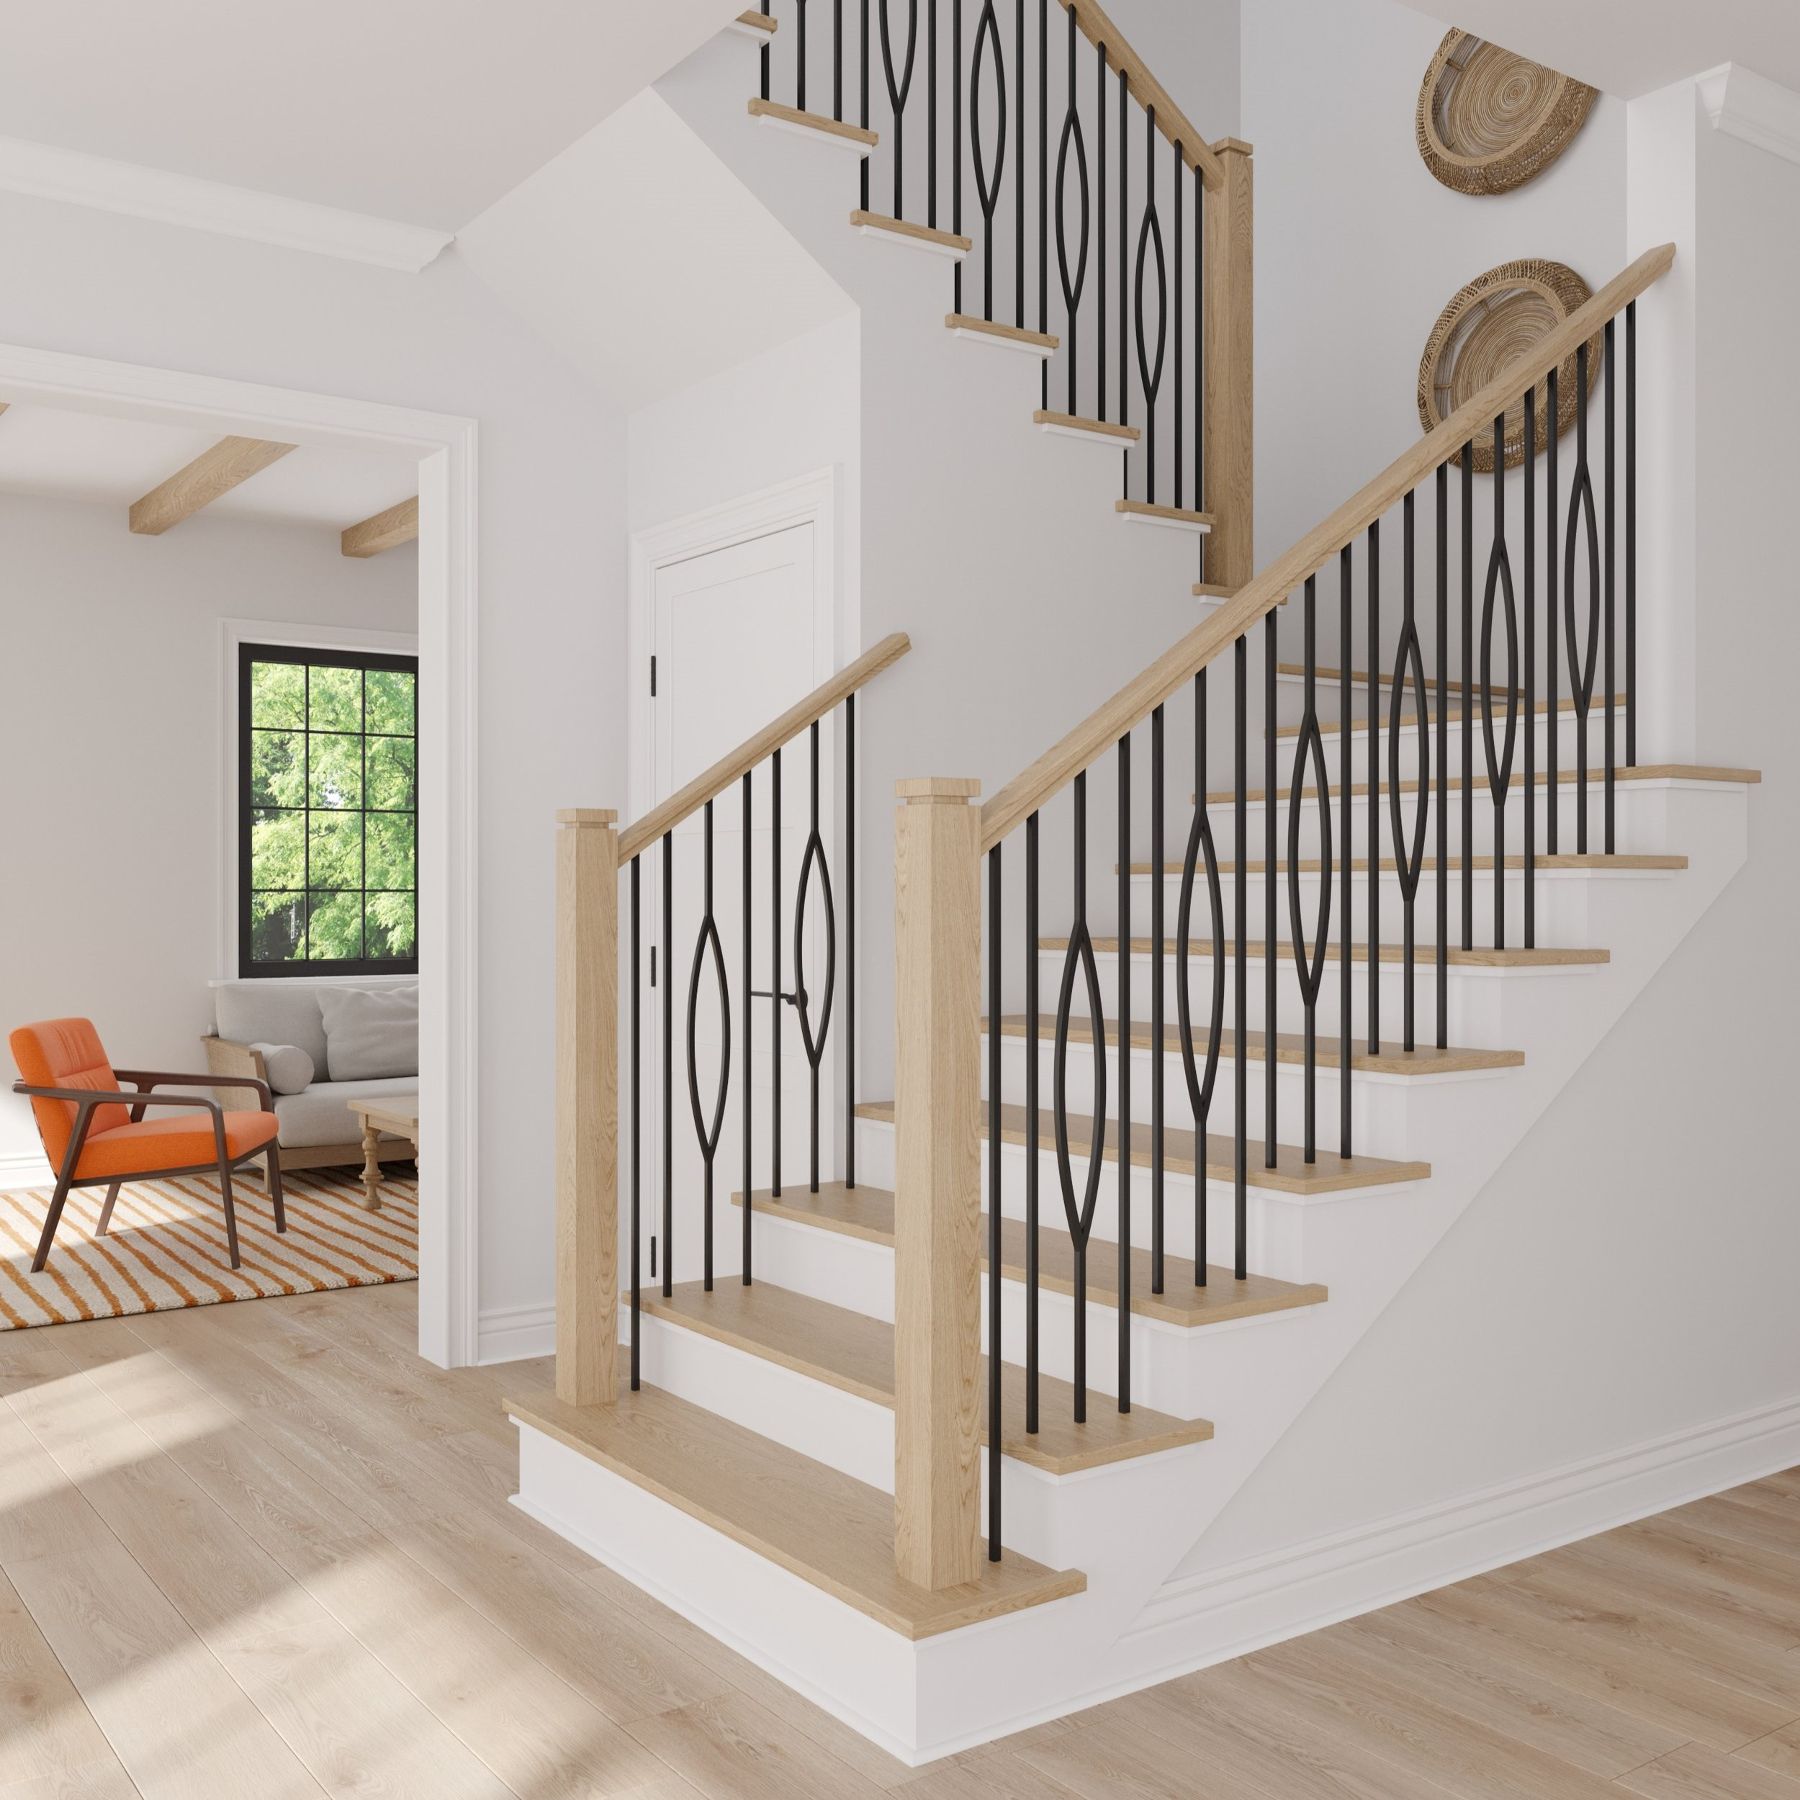 LJ Smith stair systems